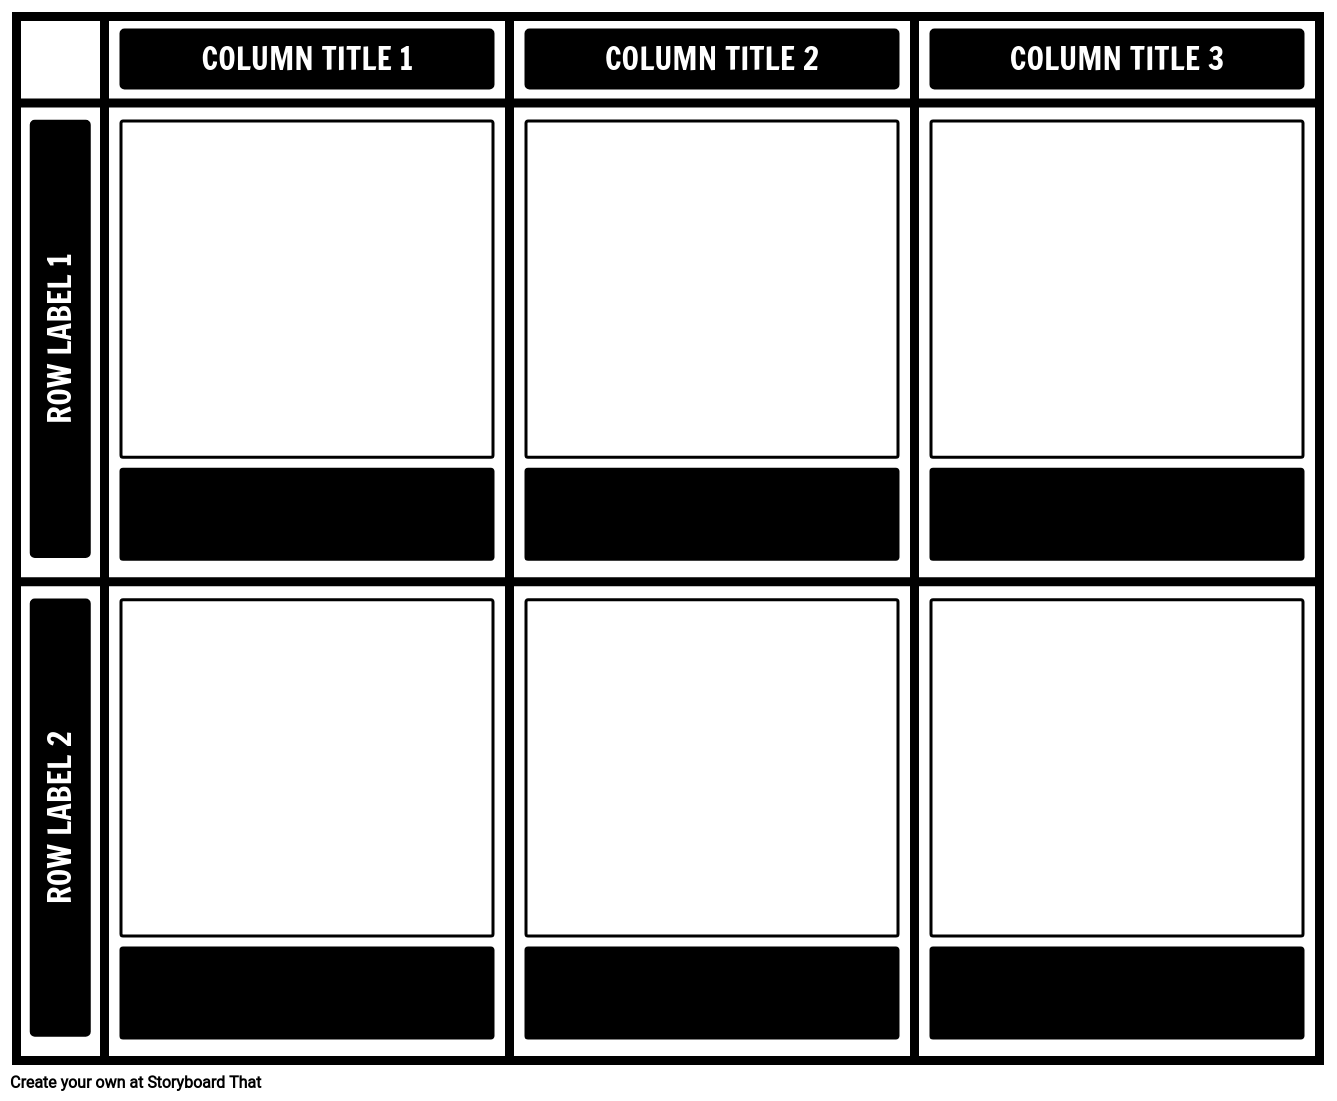 3-columns-by-2-rows-storyboard-chart-template-with-titles-and-descriptions